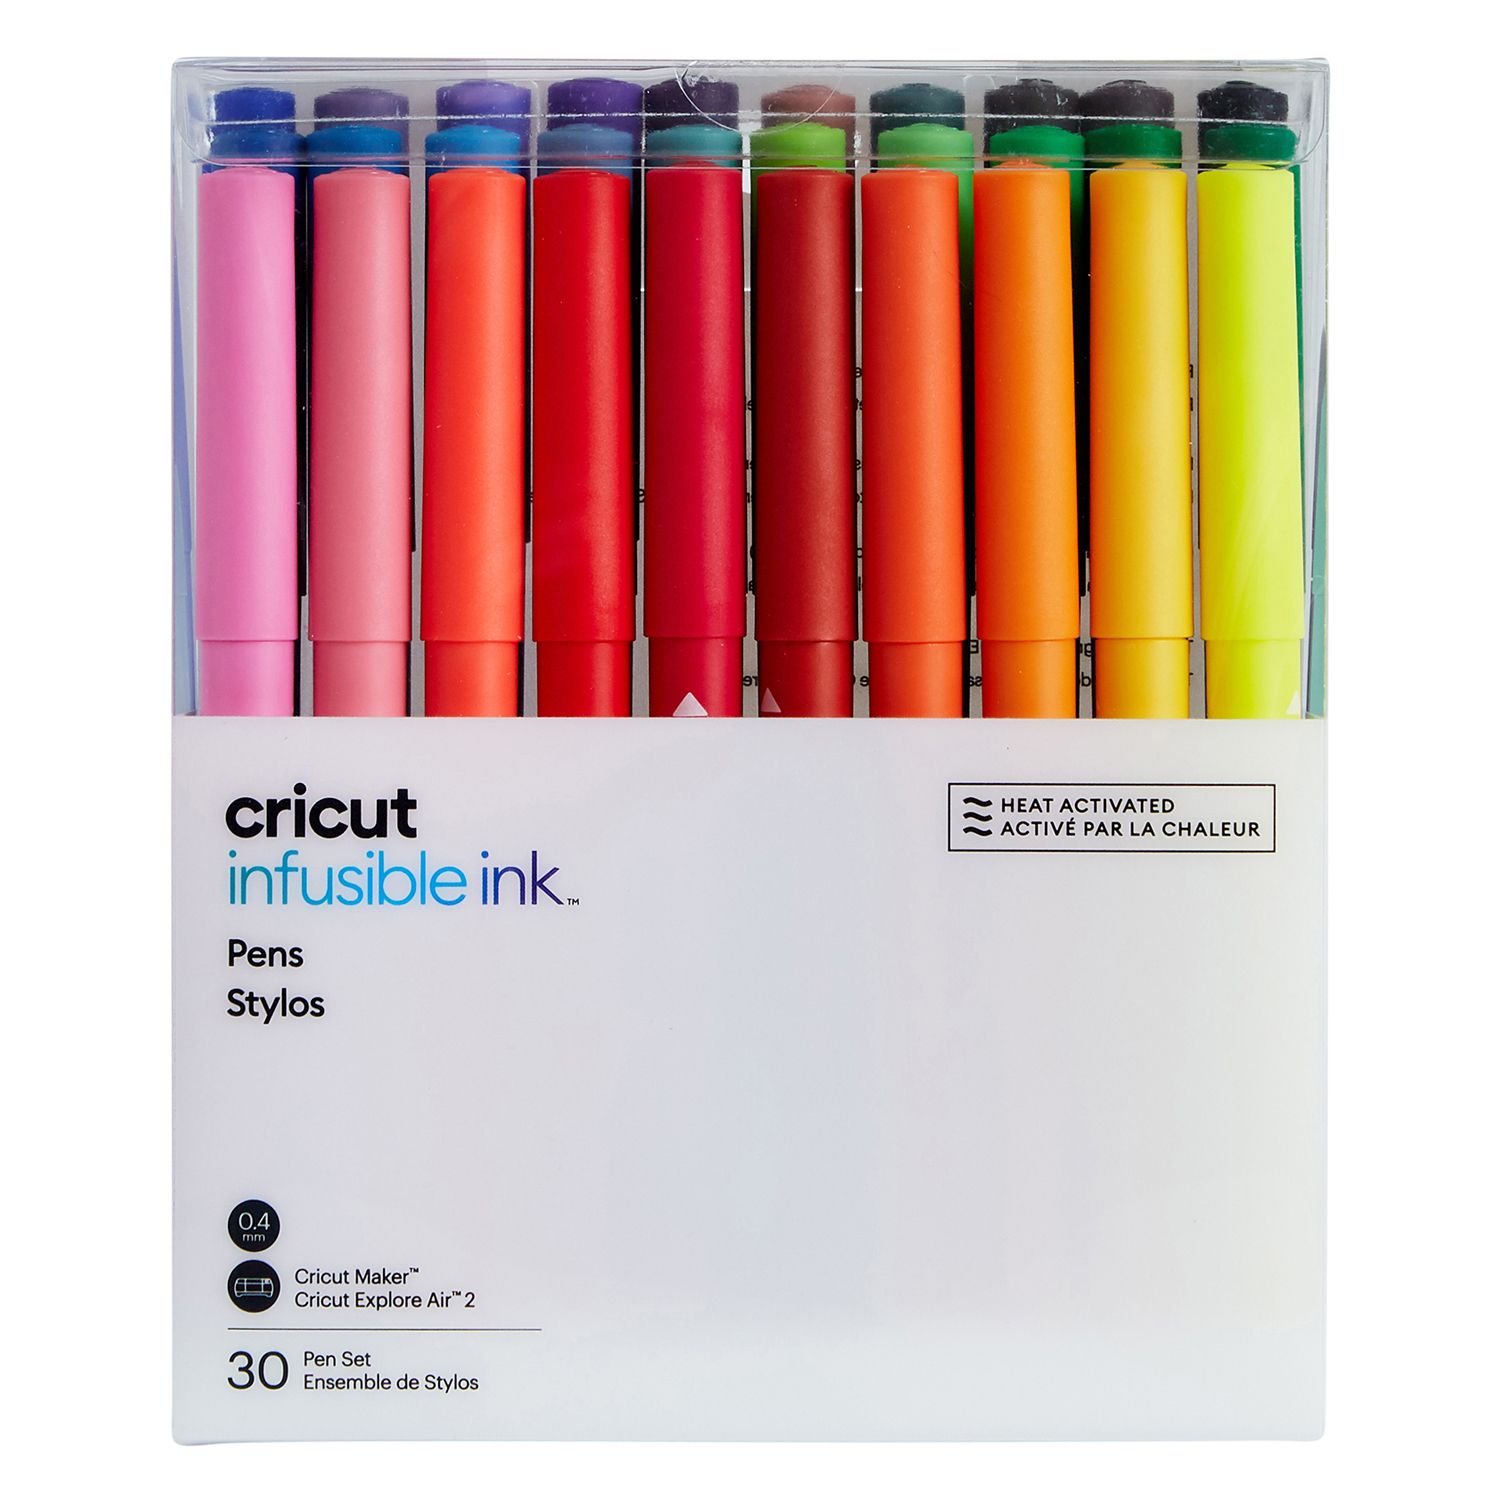 Cricut 2ct 12x12 Infusible Ink Transfer Sheets - Bright Teal